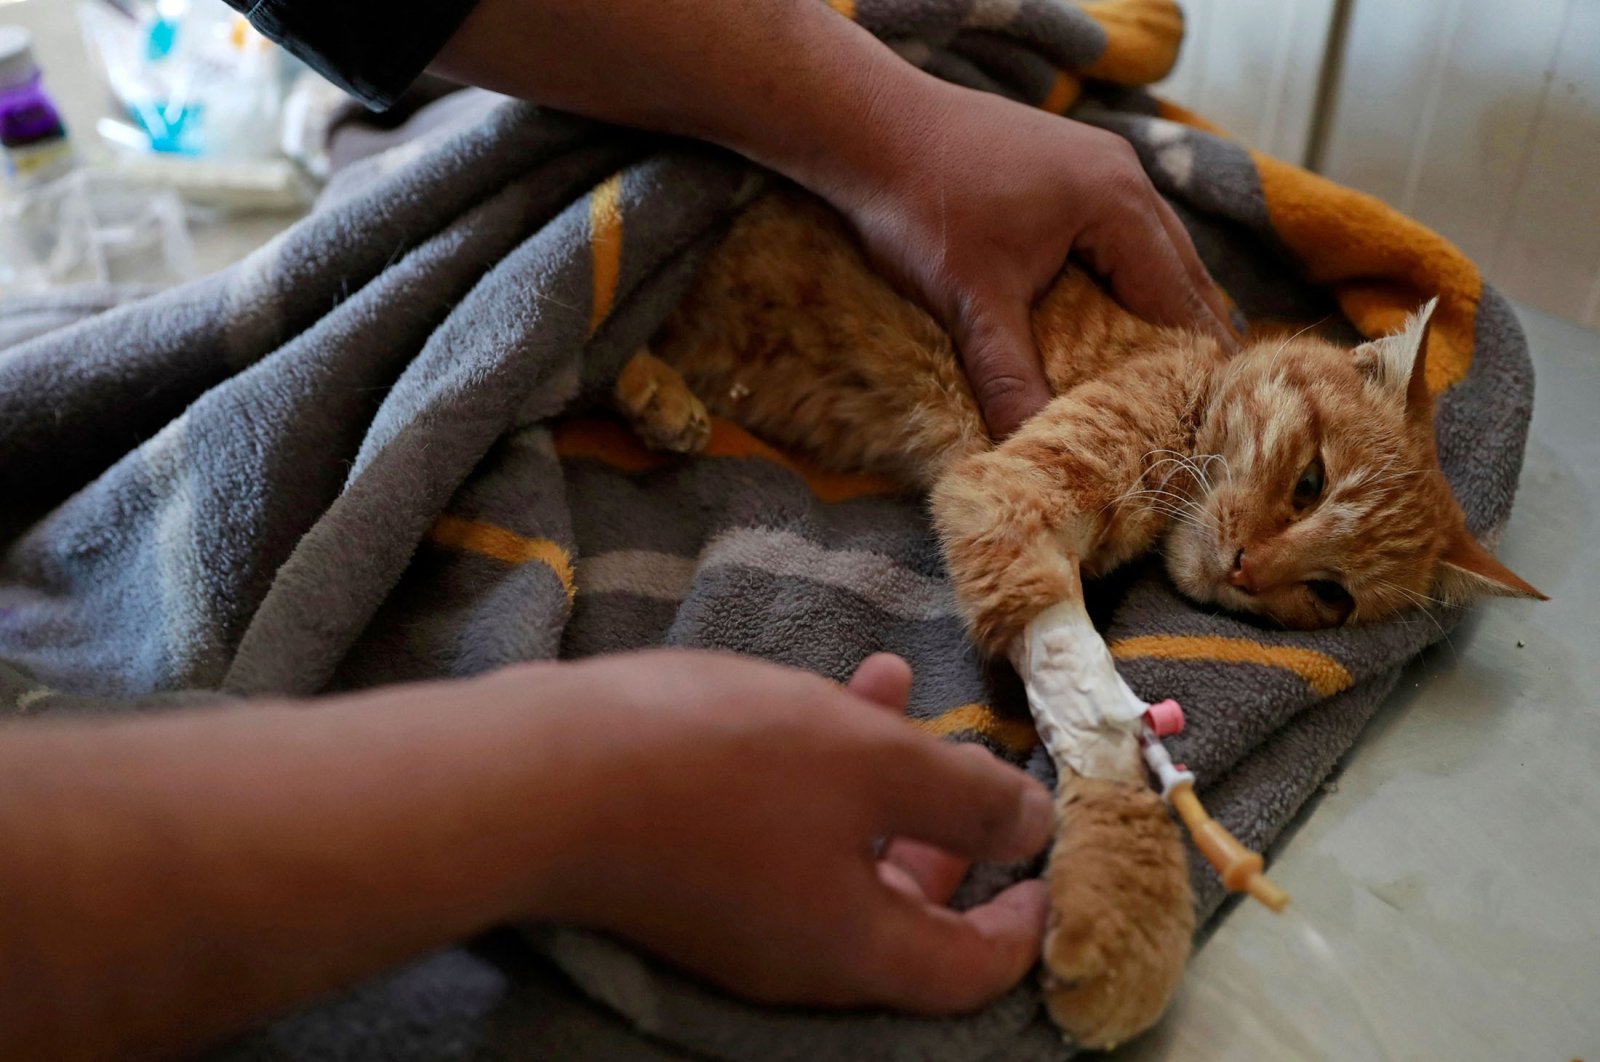 A veterinarian volunteering at the Baghdad Animal Rescue, examines an injured cat at the shelter, west of the capital Baghdad, Iraq, Jan. 16, 2022. (AFP Photo)